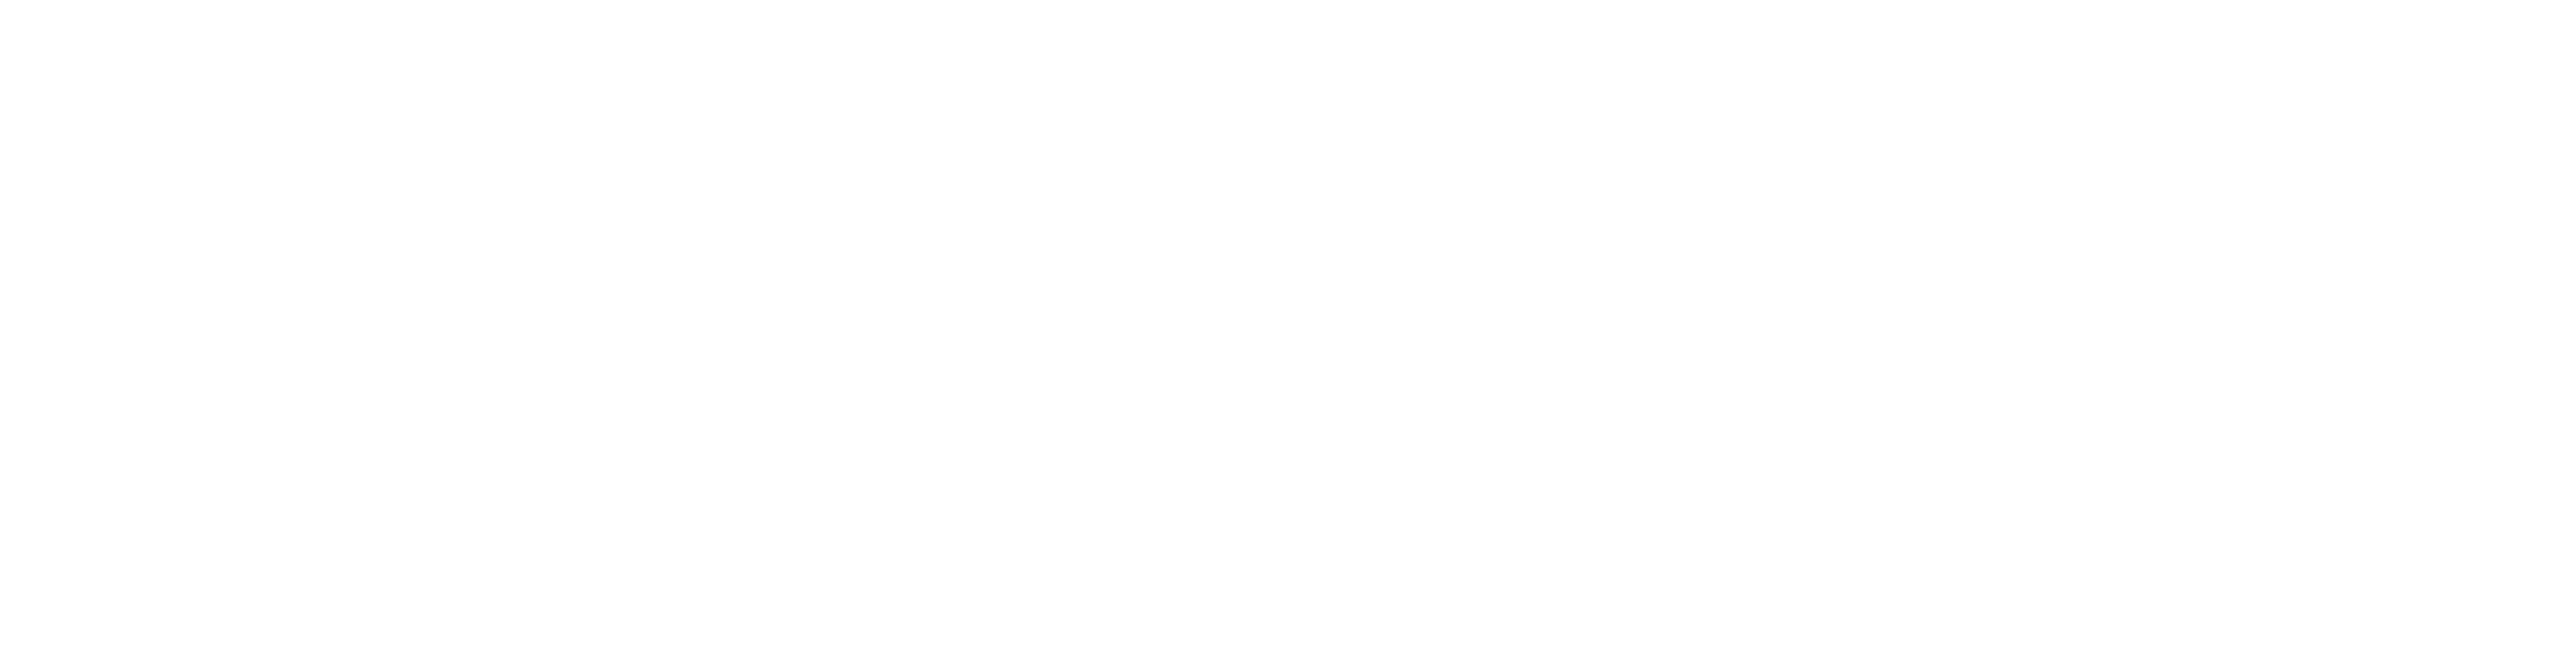 Unfinished Business title